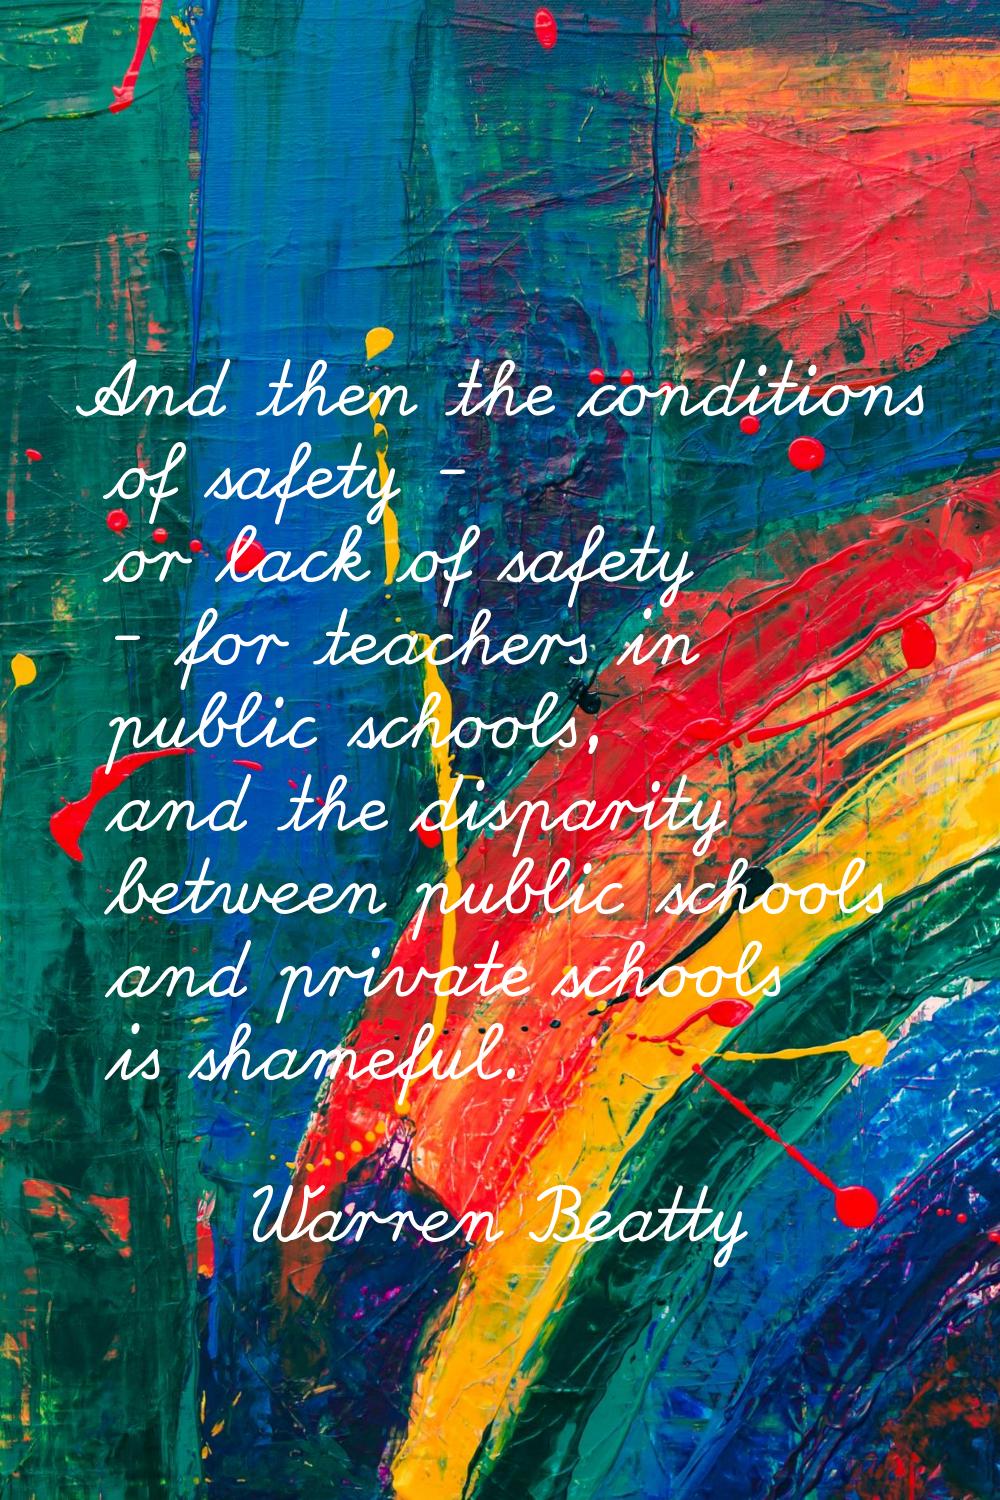 And then the conditions of safety - or lack of safety - for teachers in public schools, and the dis